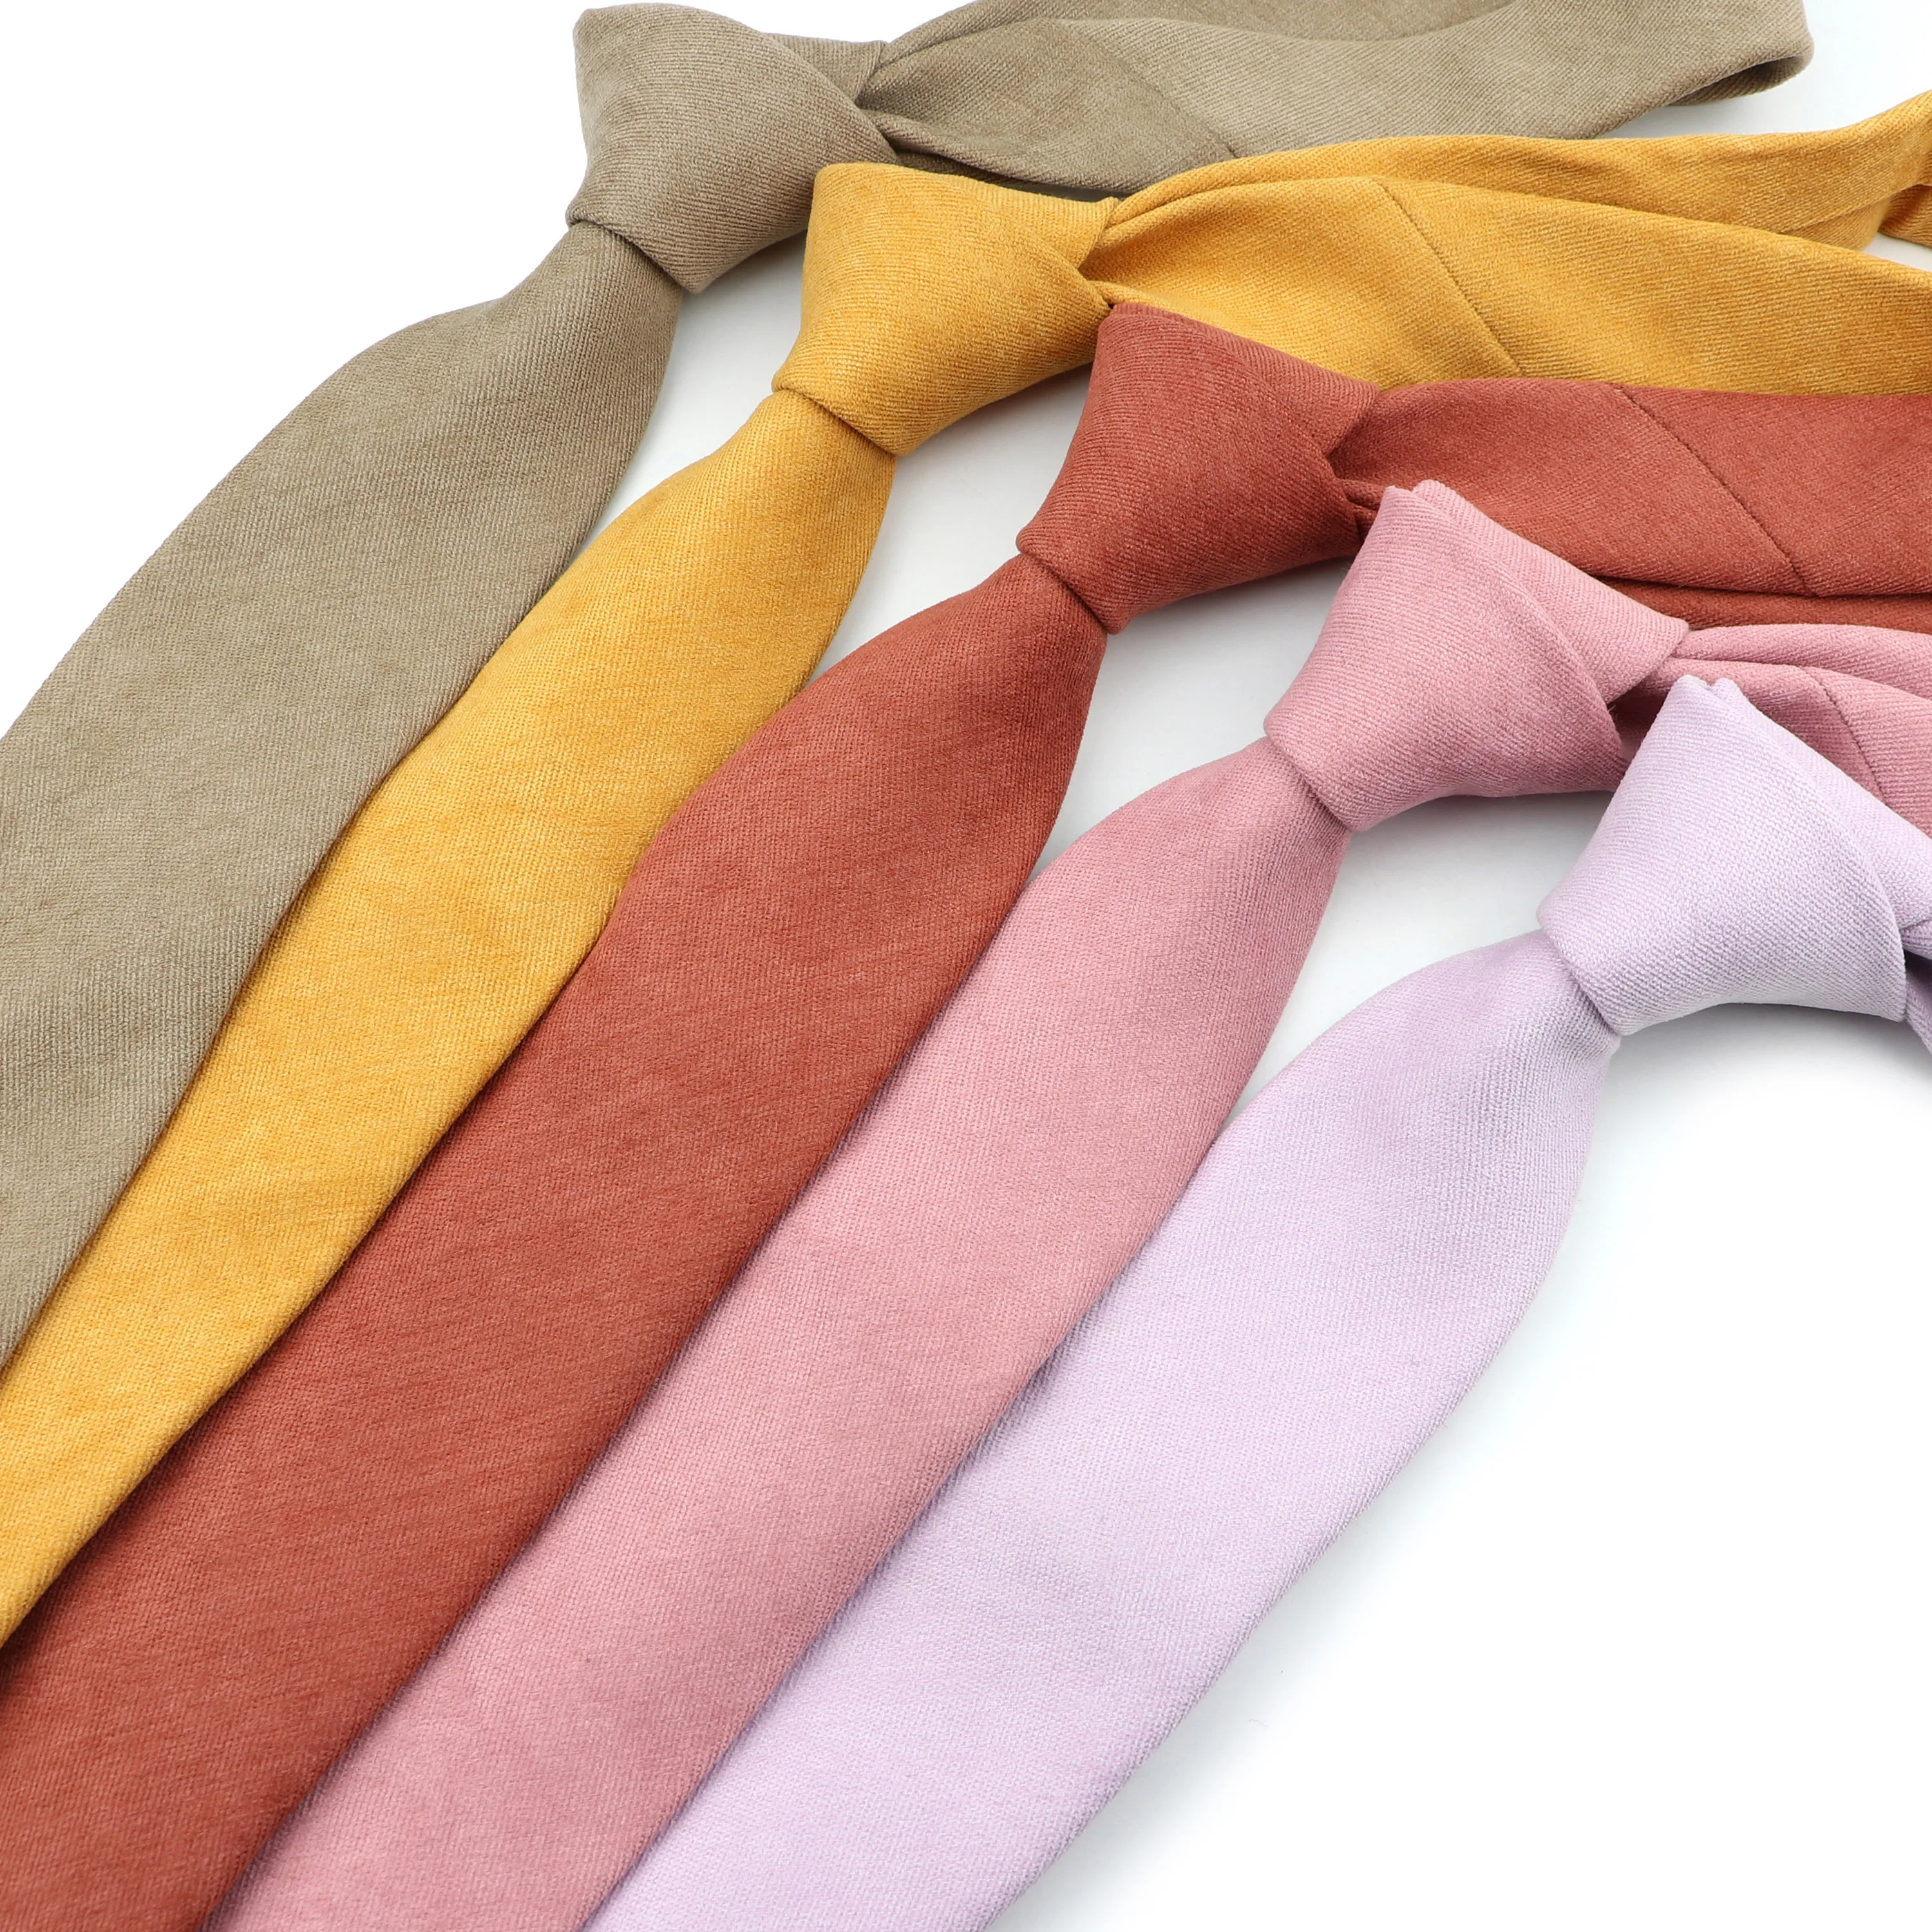 

Men's Solid Color Tie Soft Downy Suede Colorful Red Blue Gray Green 7cm Cotton Necktie For Formal Party Wedding Groom Nice Gift